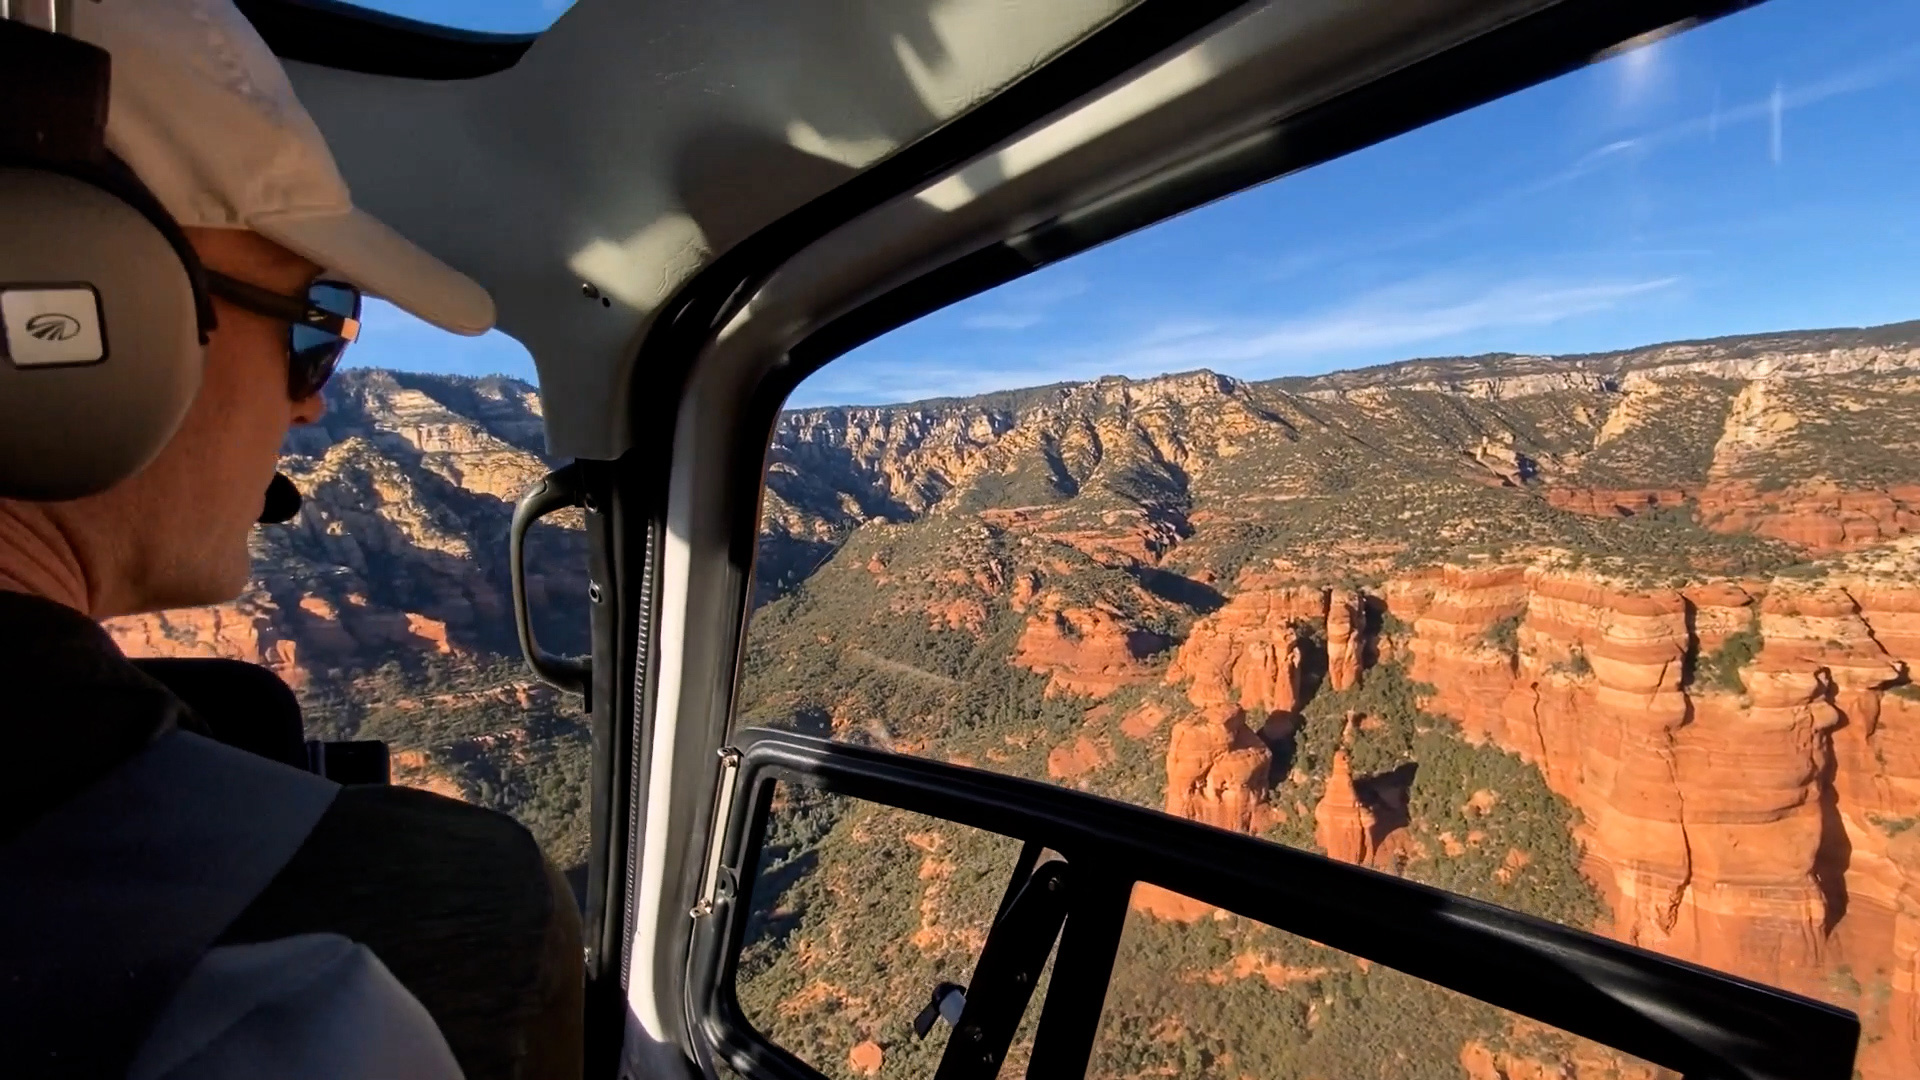 View from inside a helicopter flying over red rock canyons in Sedona